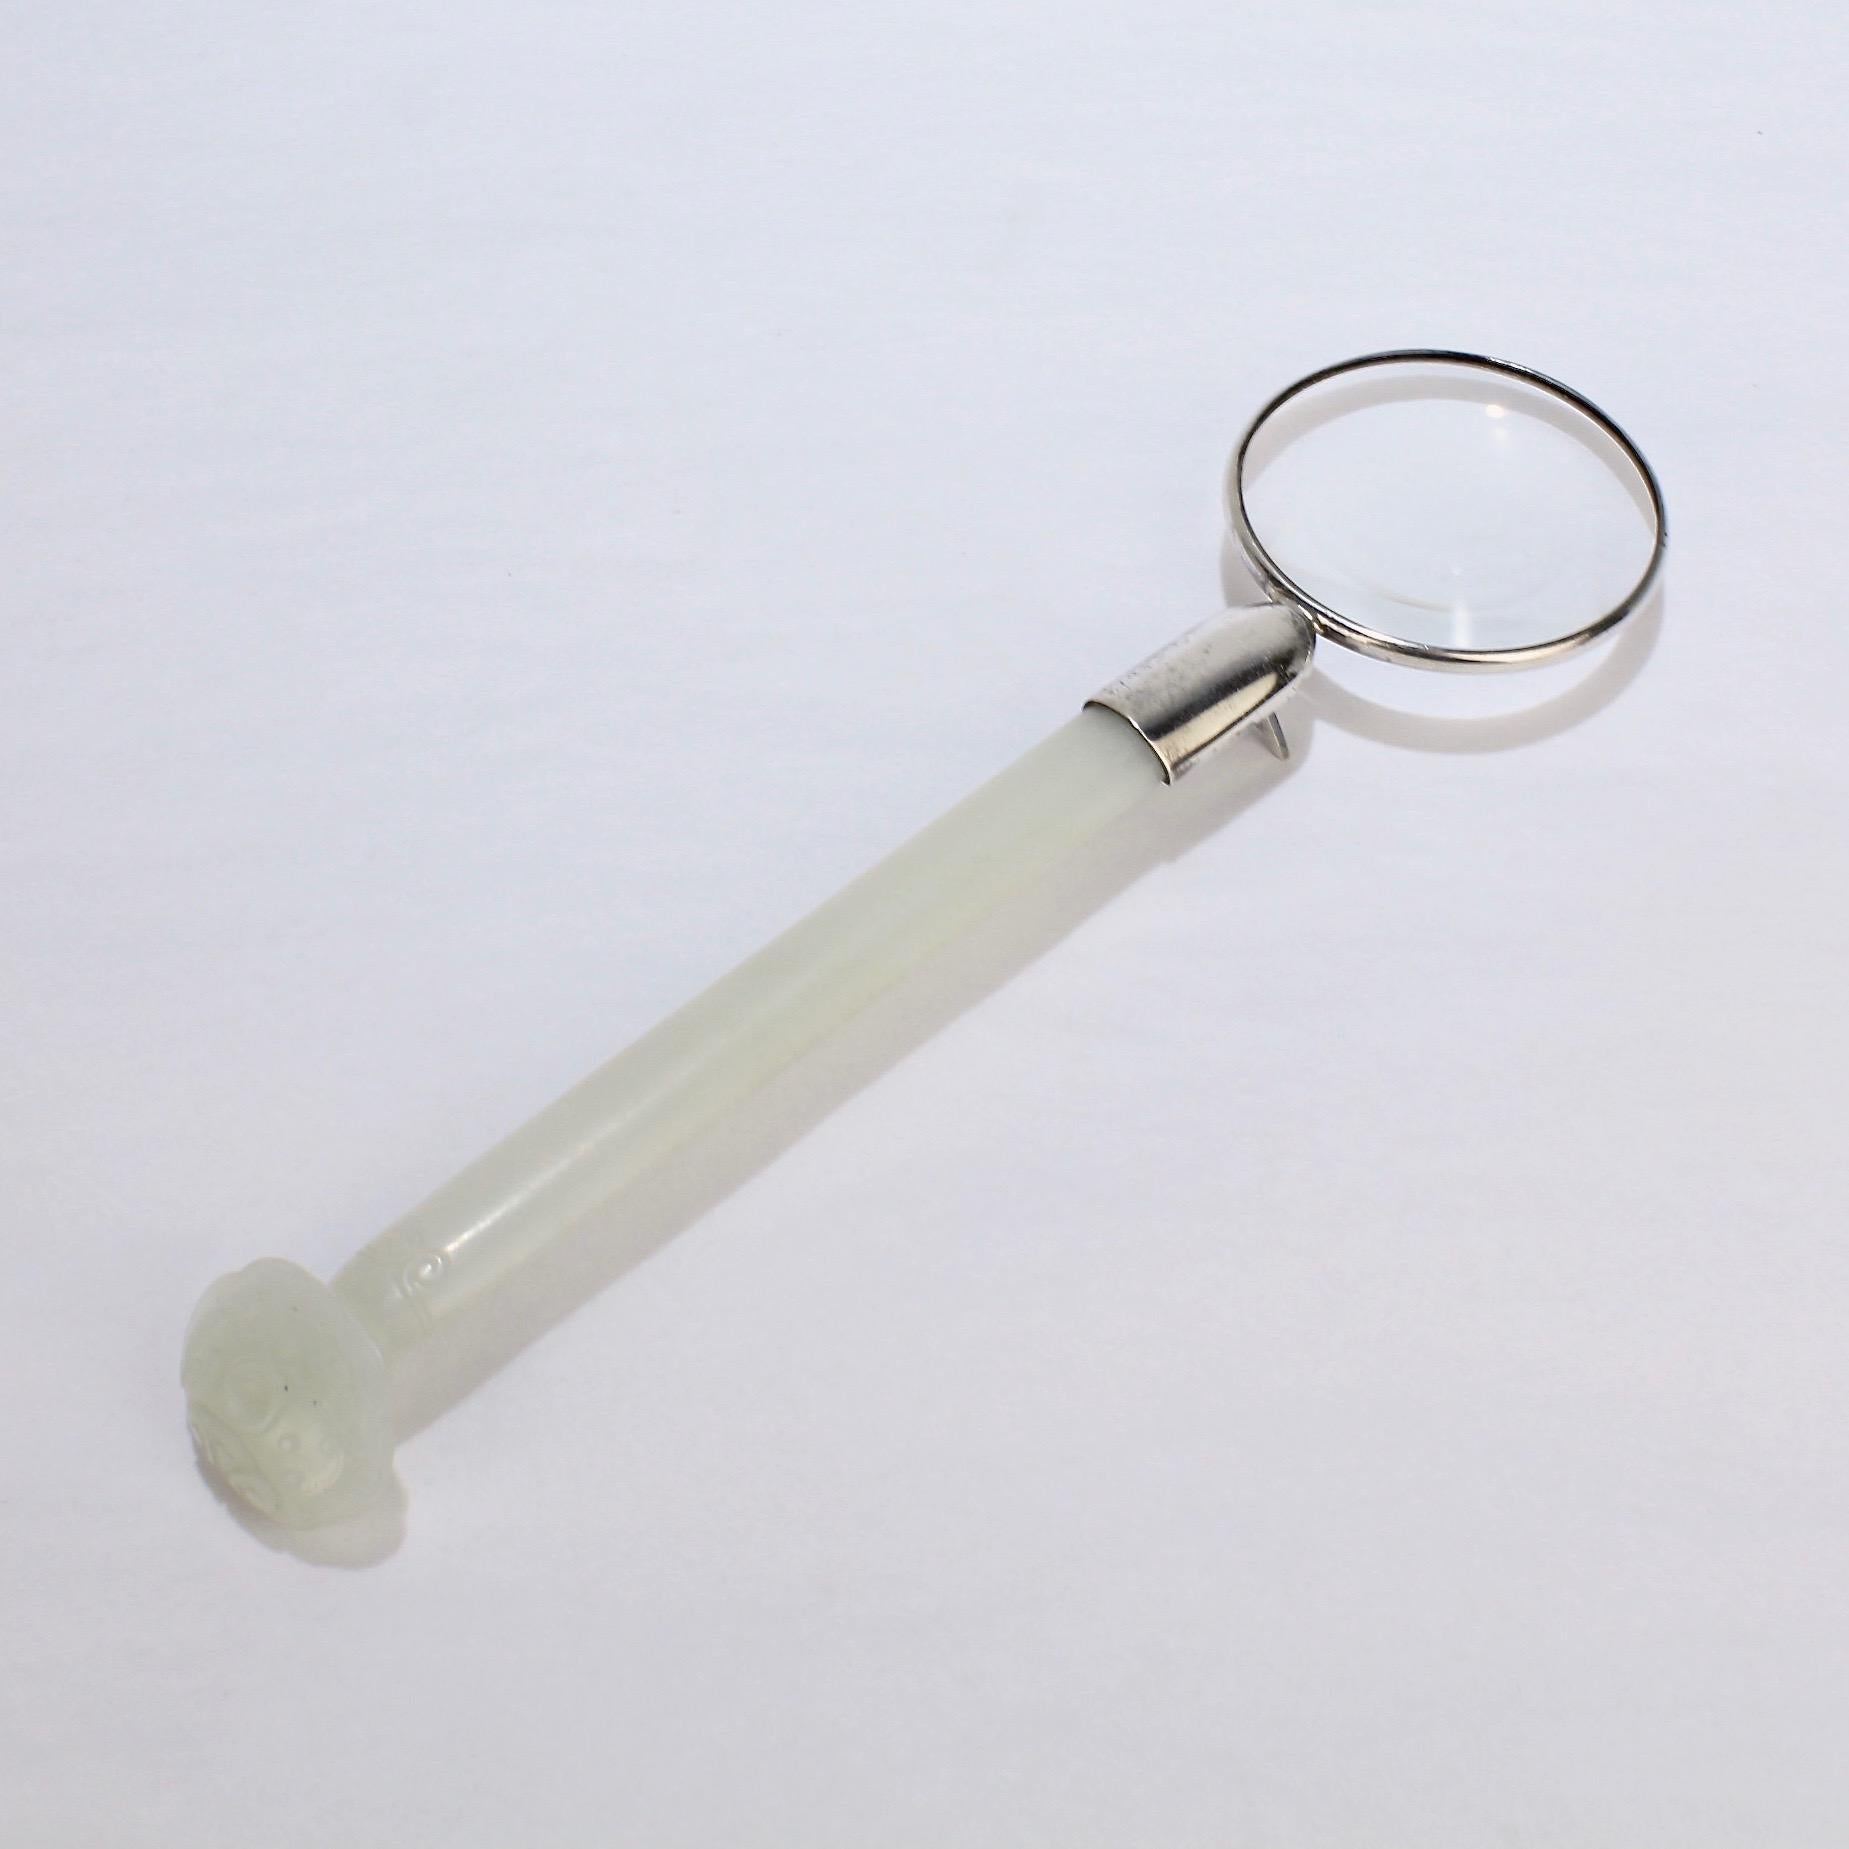 A fine antique jade mounted as a magnifying glass.

In the form of a Ruki shaped hairpin. The glass is framed in a silver tone metal and supported with an A-frame splayed foot.

The nephrite jade is pale celadon in color. 

The magnifying glass was